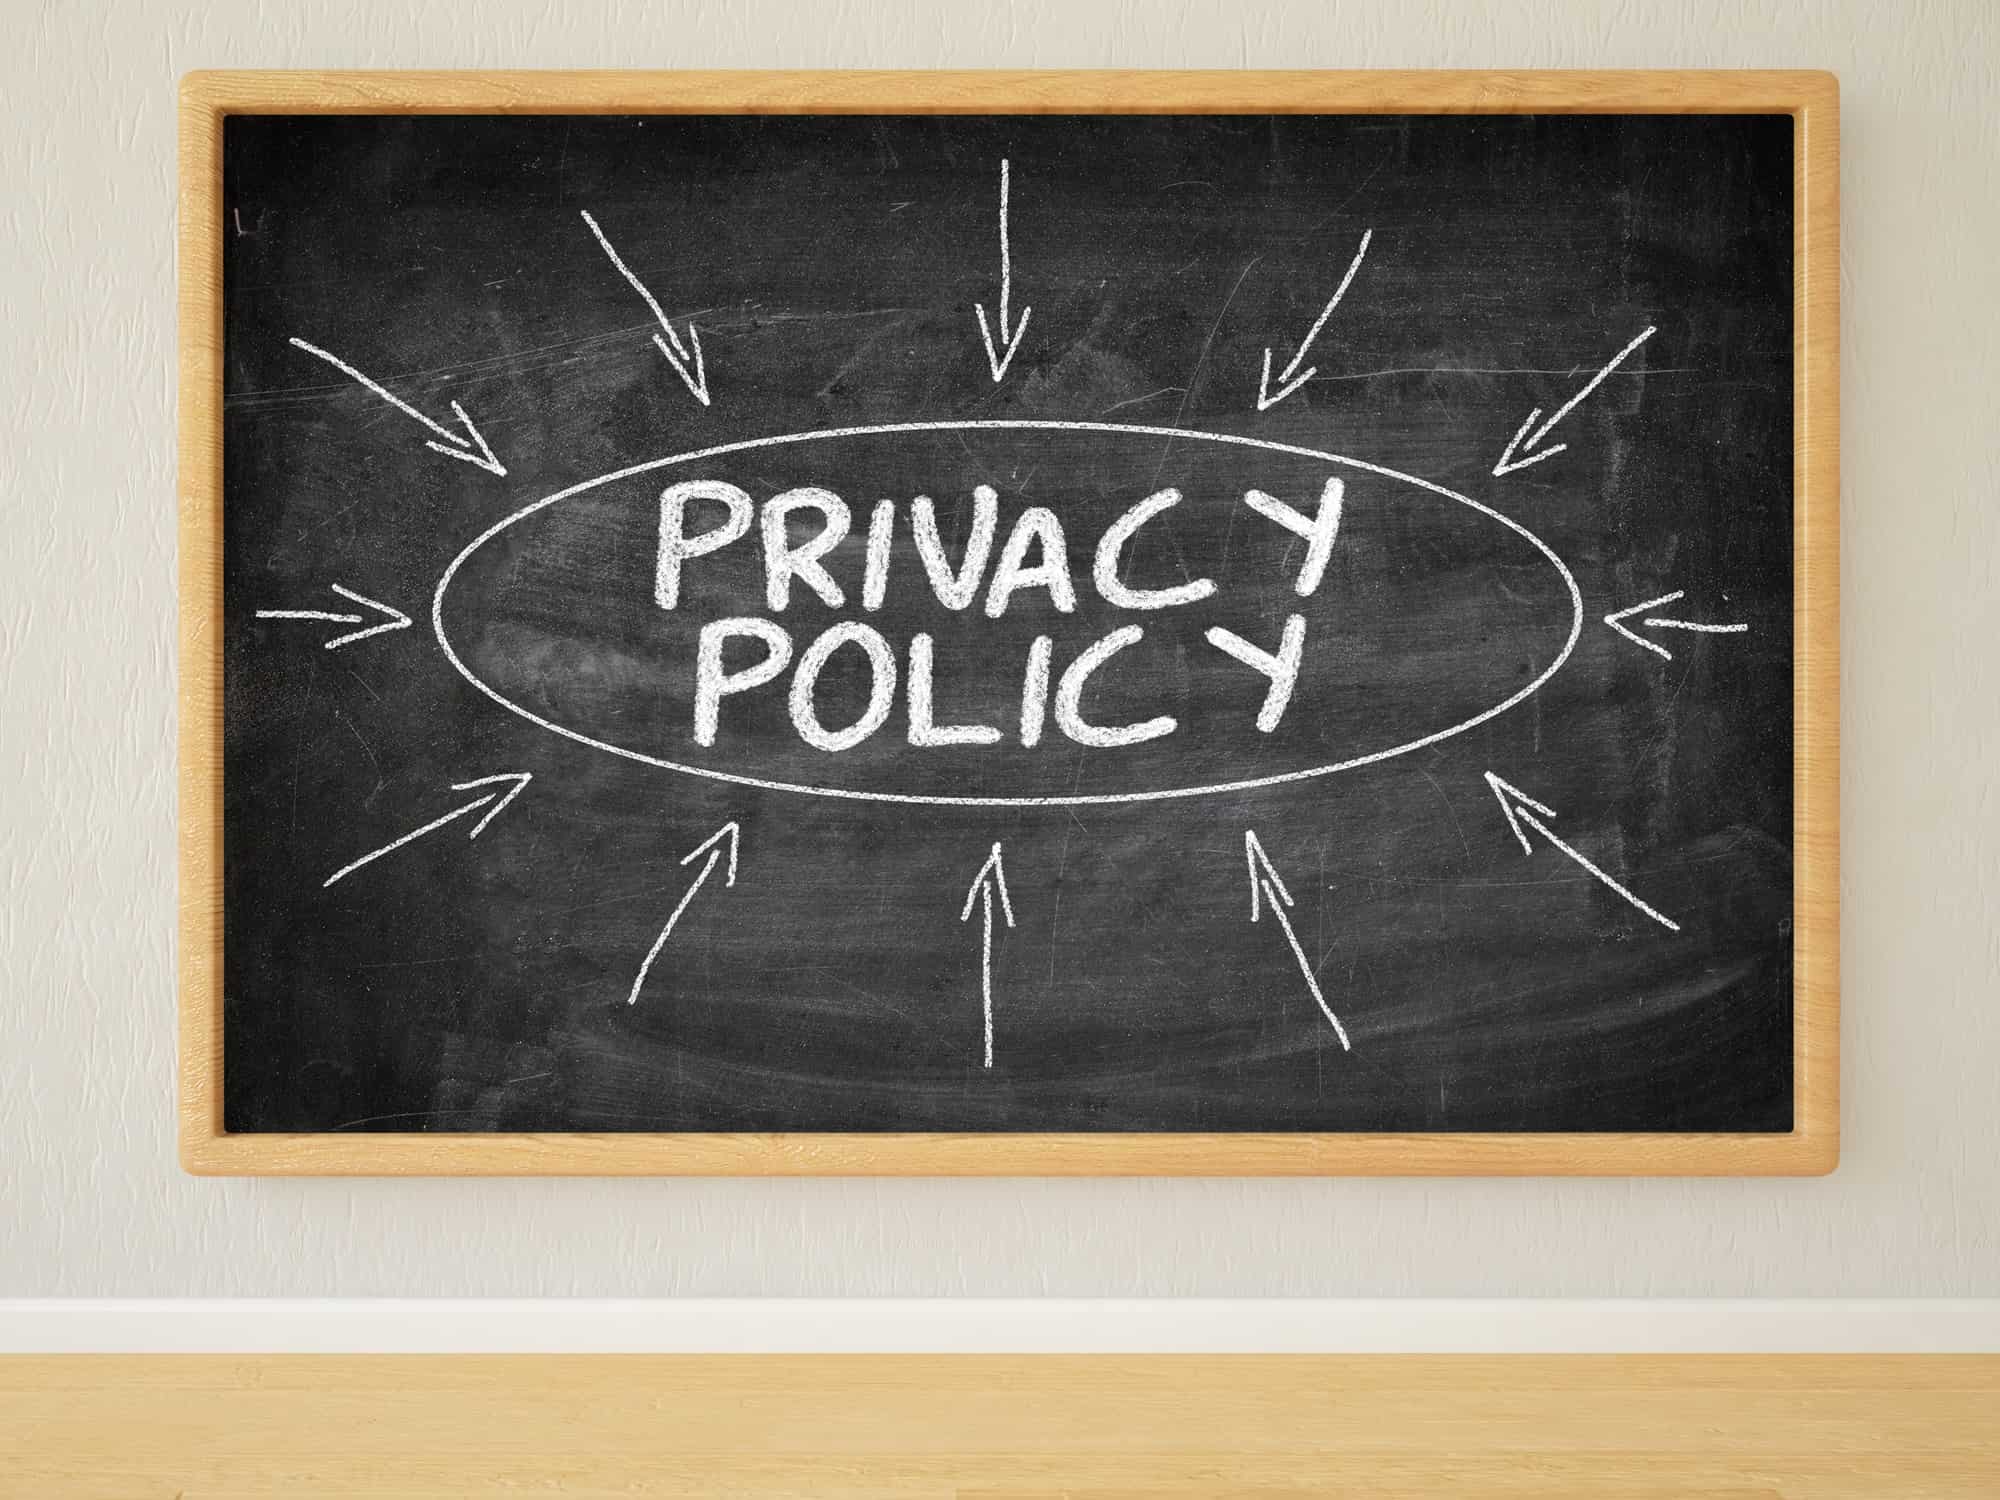 Privacy Policy image